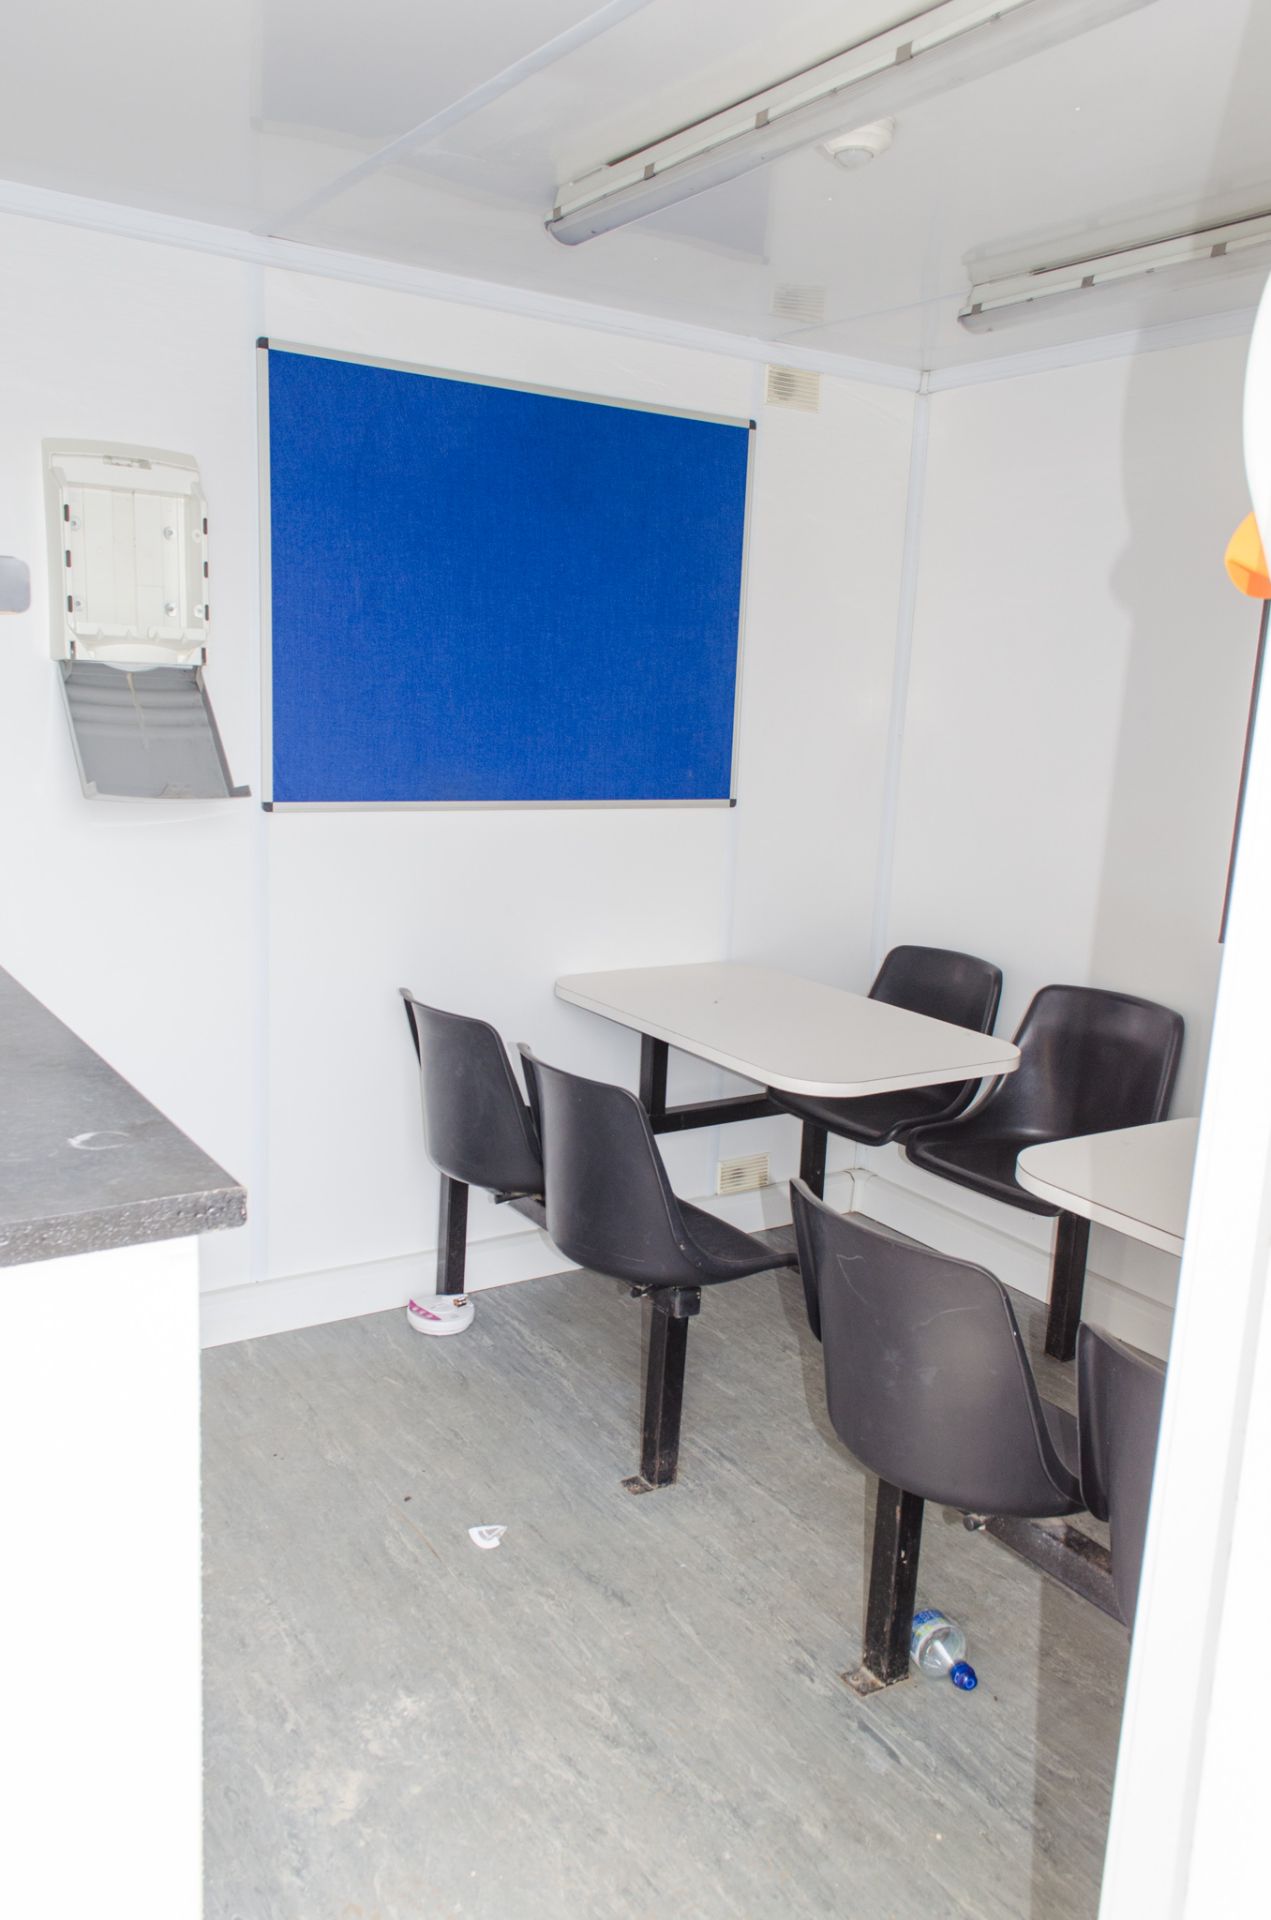 24 ft x 9 ft steel anti vandal welfare site unit Comprising of: canteen area, drying room, office, - Image 5 of 10